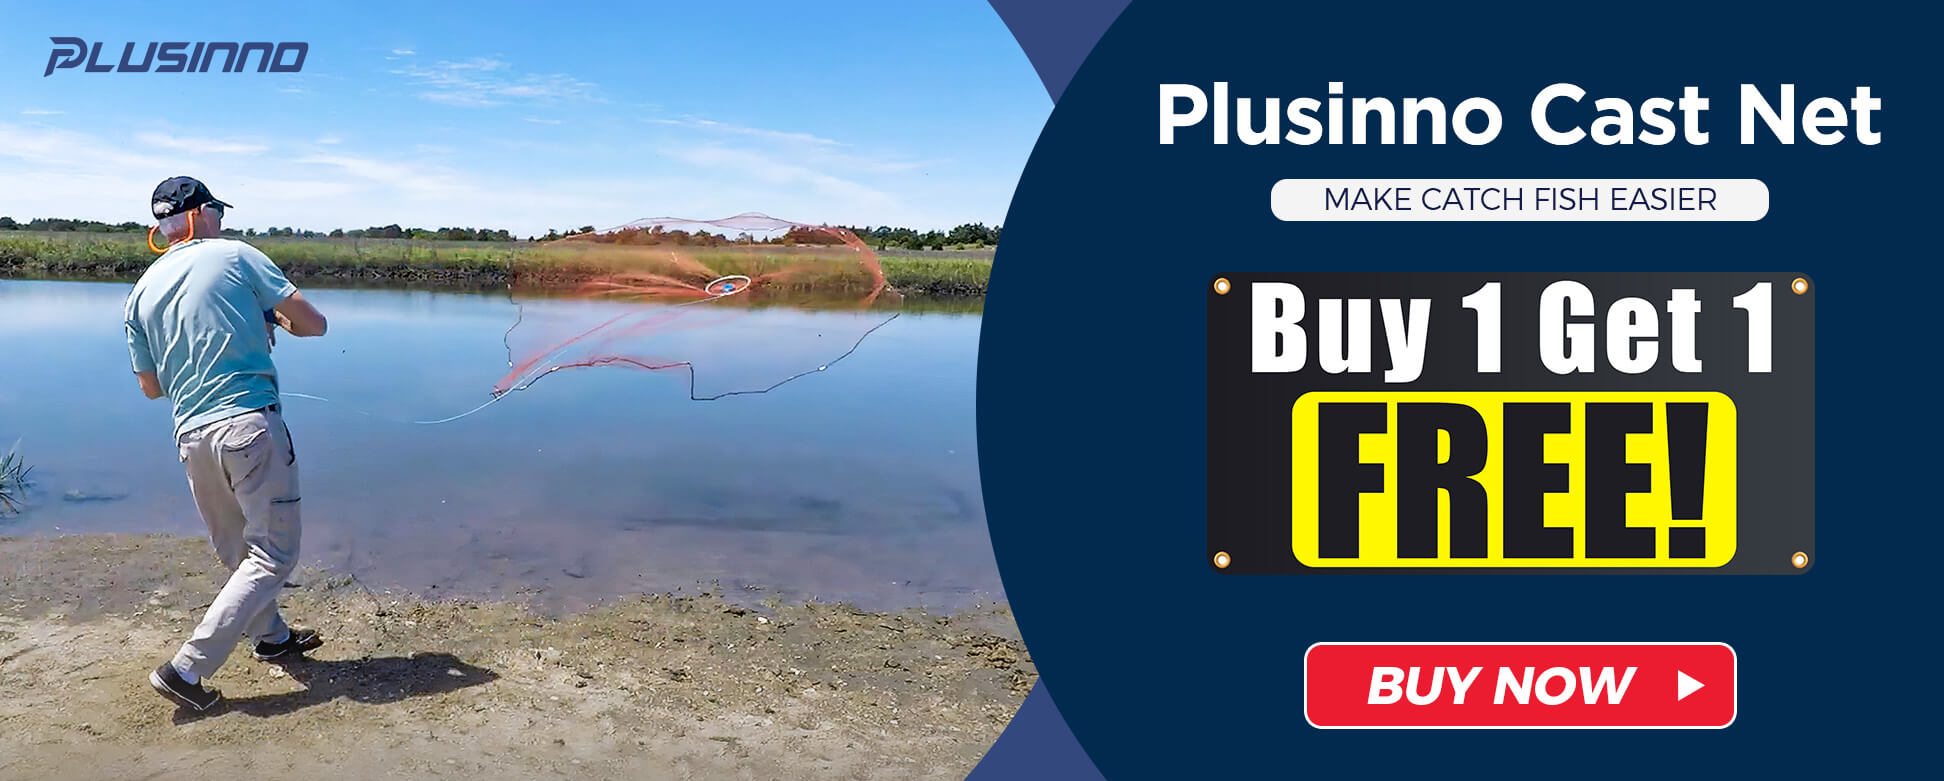 Plusinno, Fishing Online For Anglers